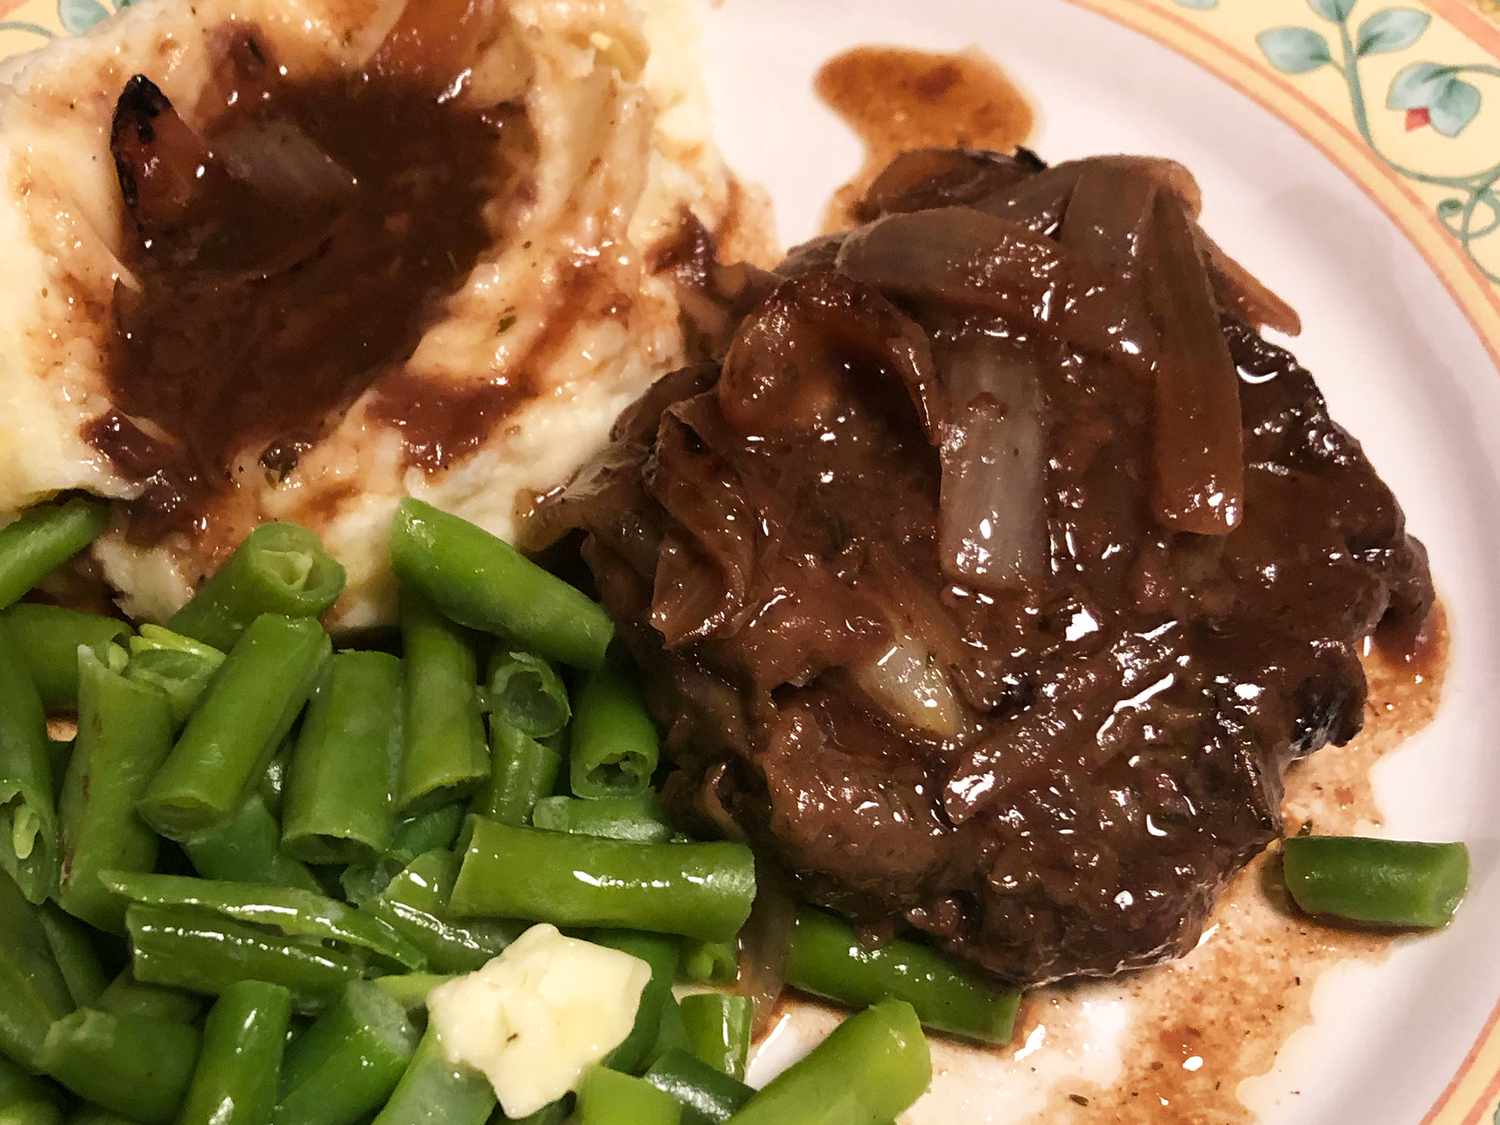 close up view of braised eye round steak served with green beans, mashed potatoes and gravy on a plate